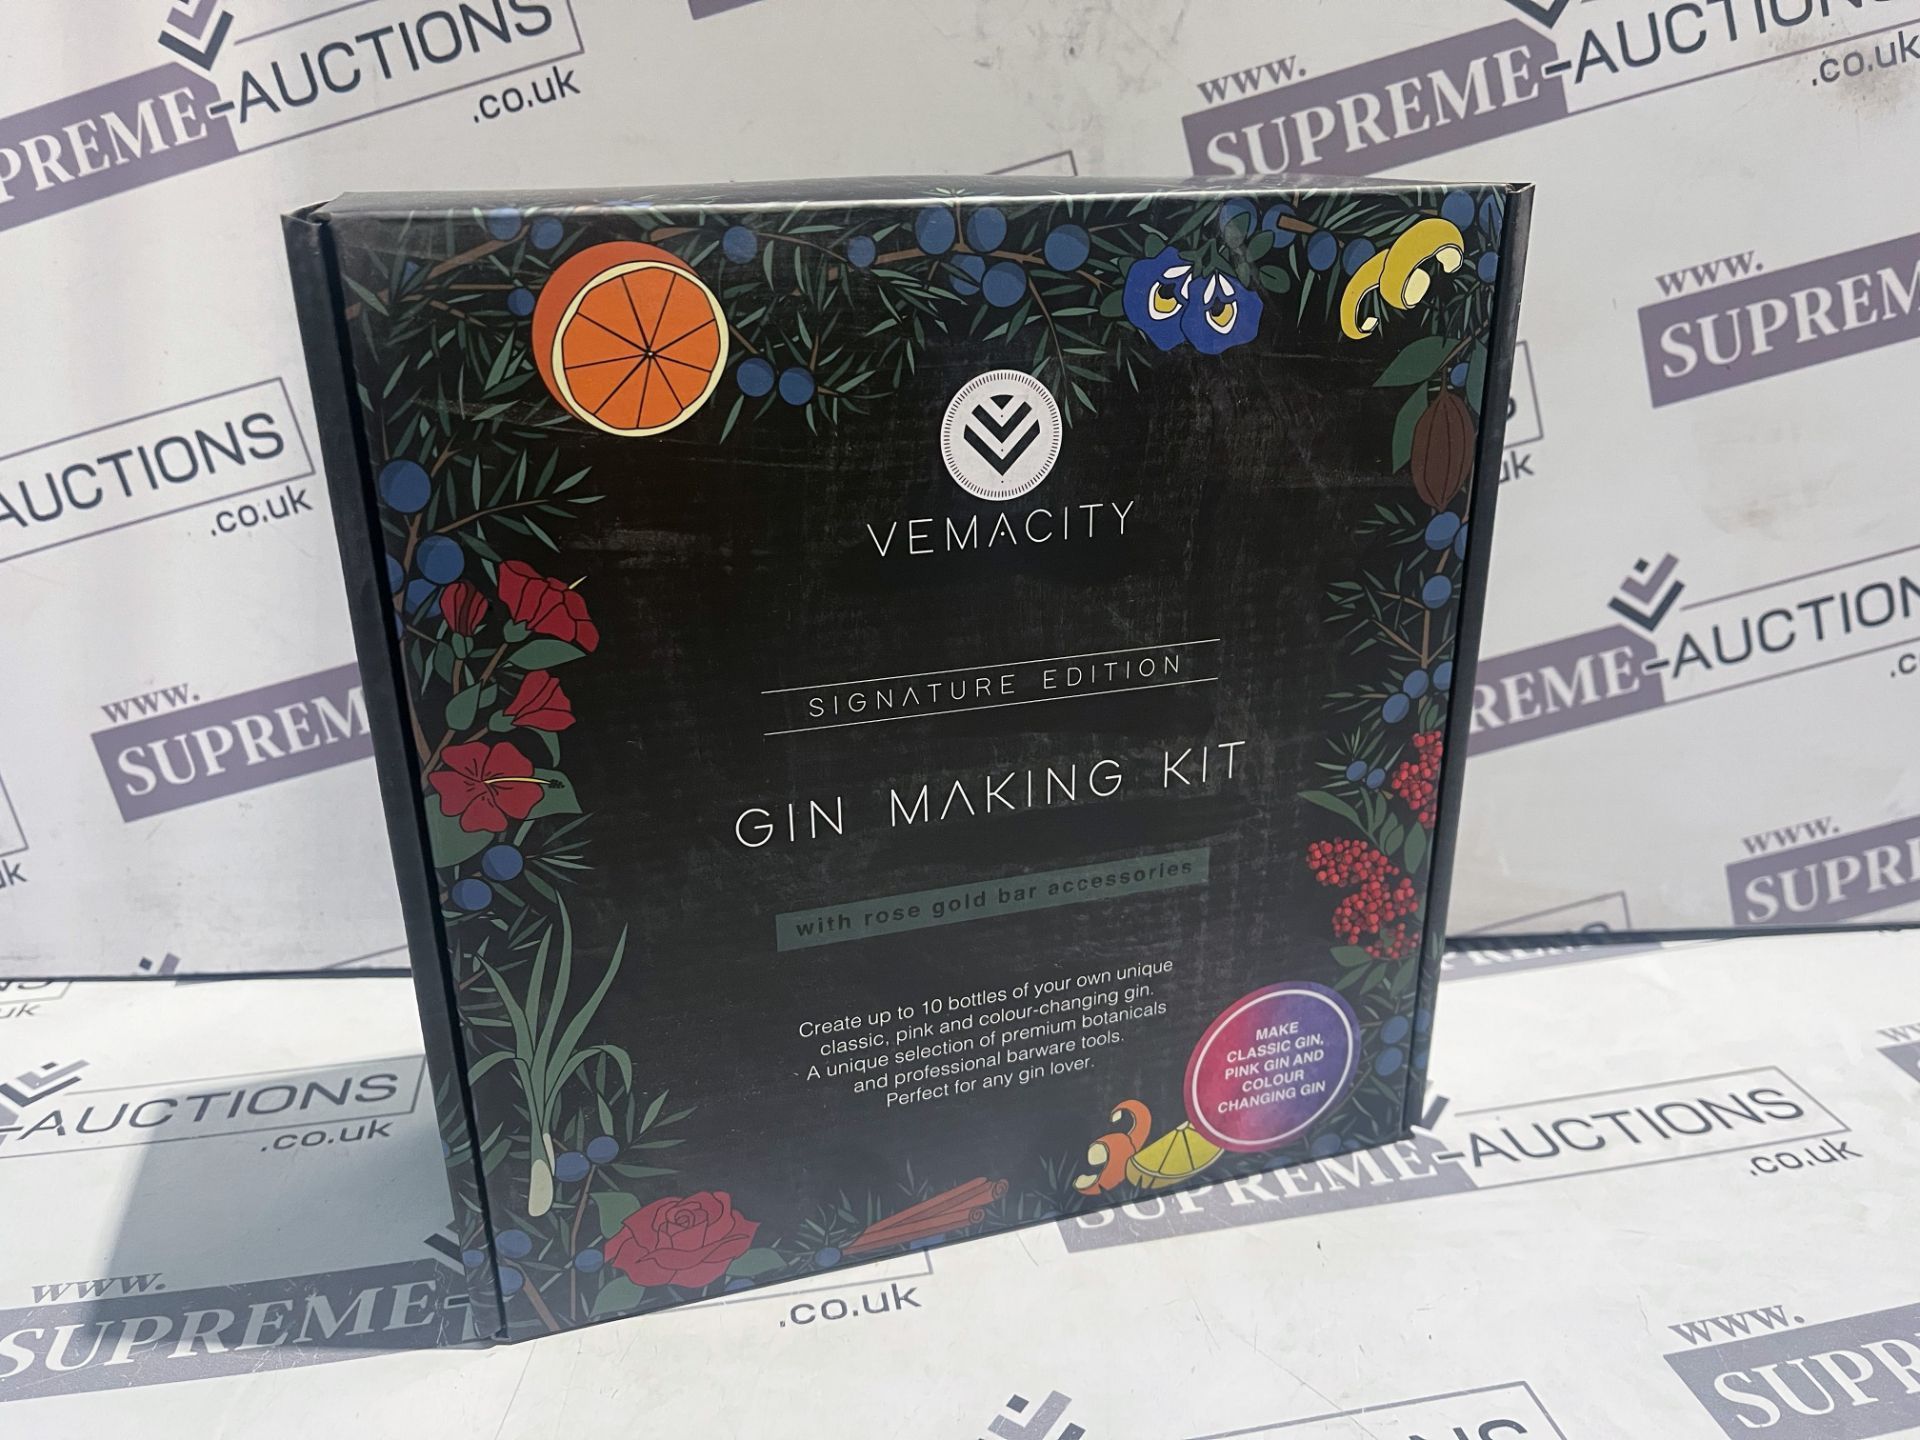 3 X BRAND NEW VEMACITY SIGNATURE EDITION GIN MAKING KITS WITH ROSE GOLD BAR ACCESSORIES RRP £40 EACH